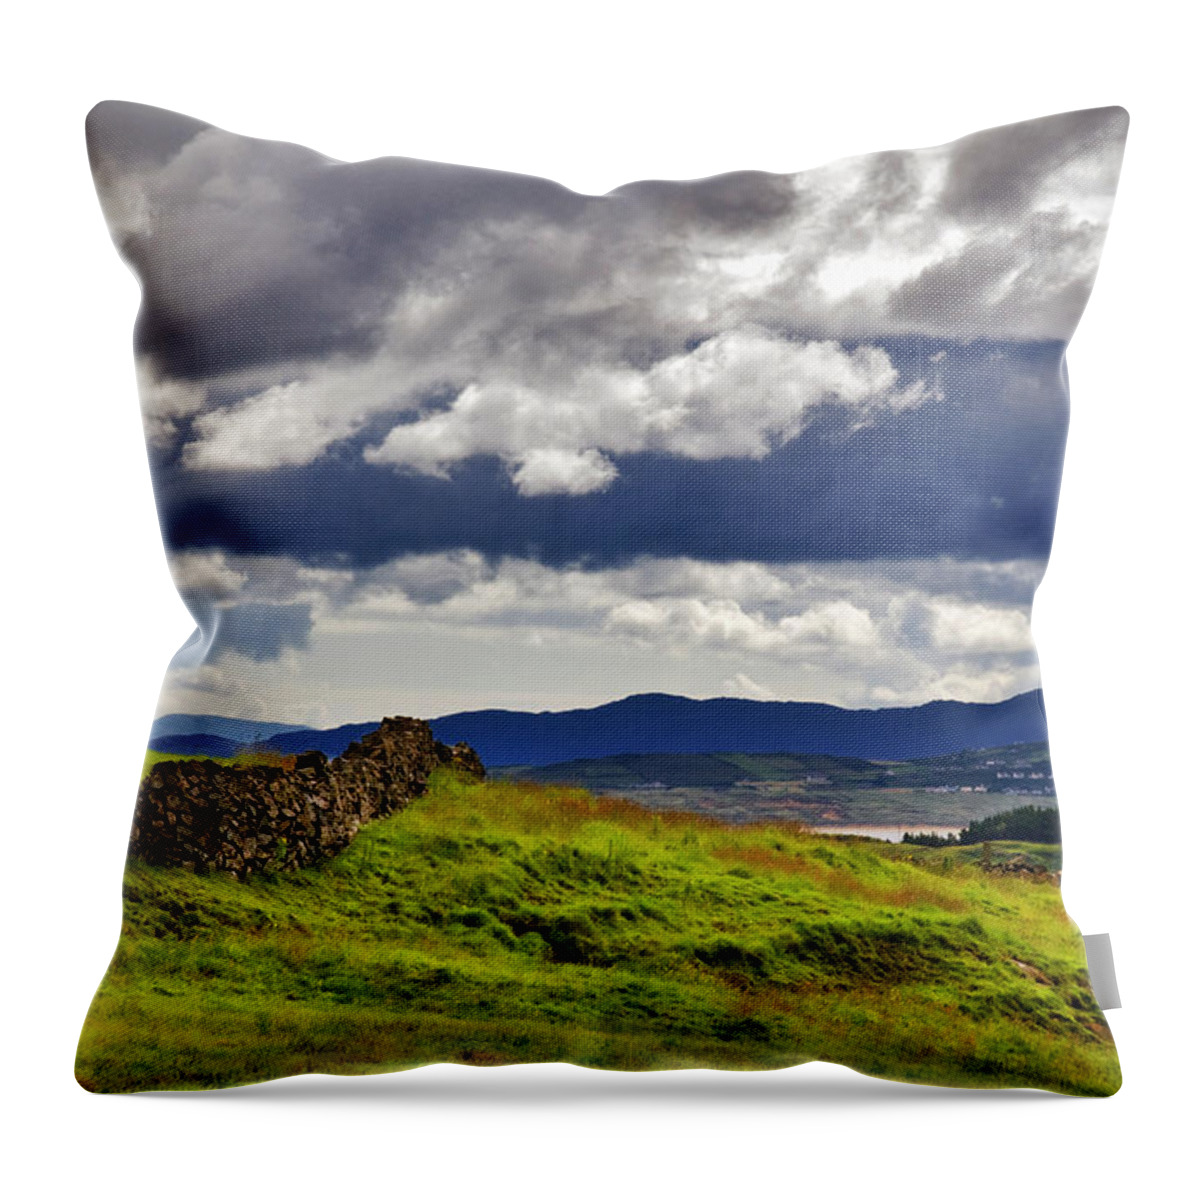 Ireland Throw Pillow featuring the photograph A Donegal Day by Martyn Boyd